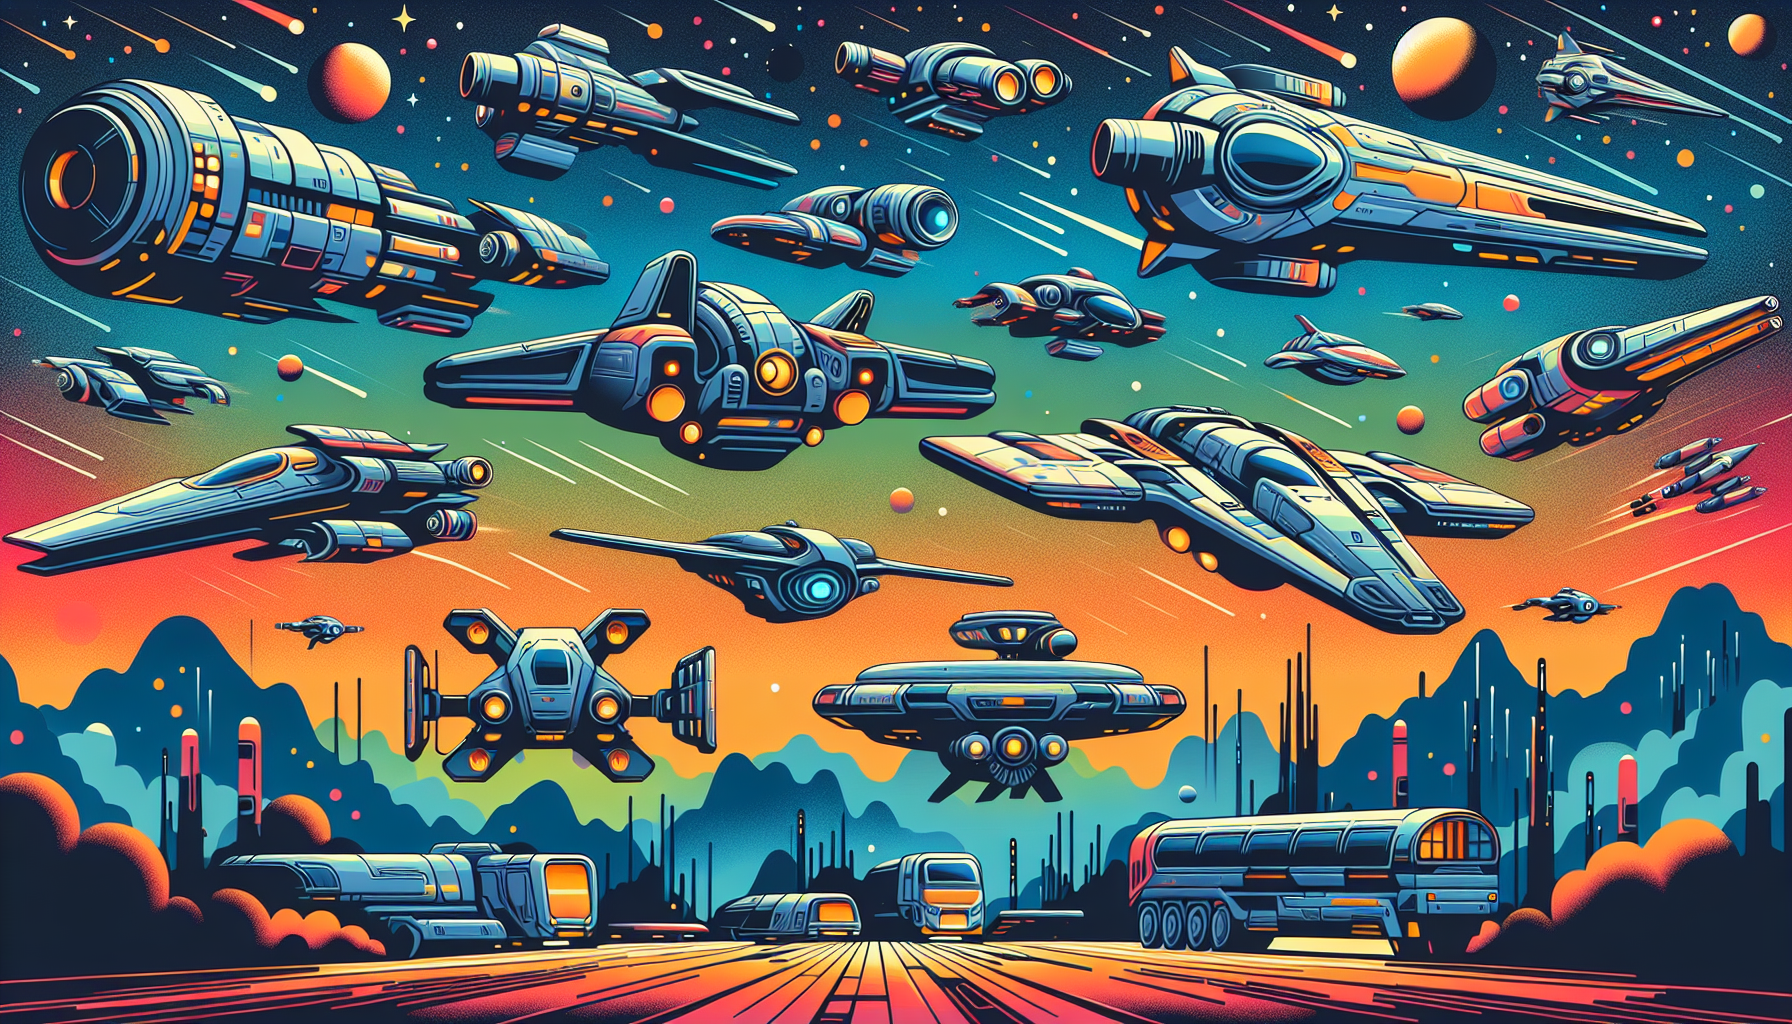 Depict several futuristic spacecrafts and ground vehicles that echo the aesthetic of a popular space opera franchise, without infricing on specific designs. Illustration style should be modern and color-rich, with an extra-terrestrial environment as a backdrop. No text should be present in the image.